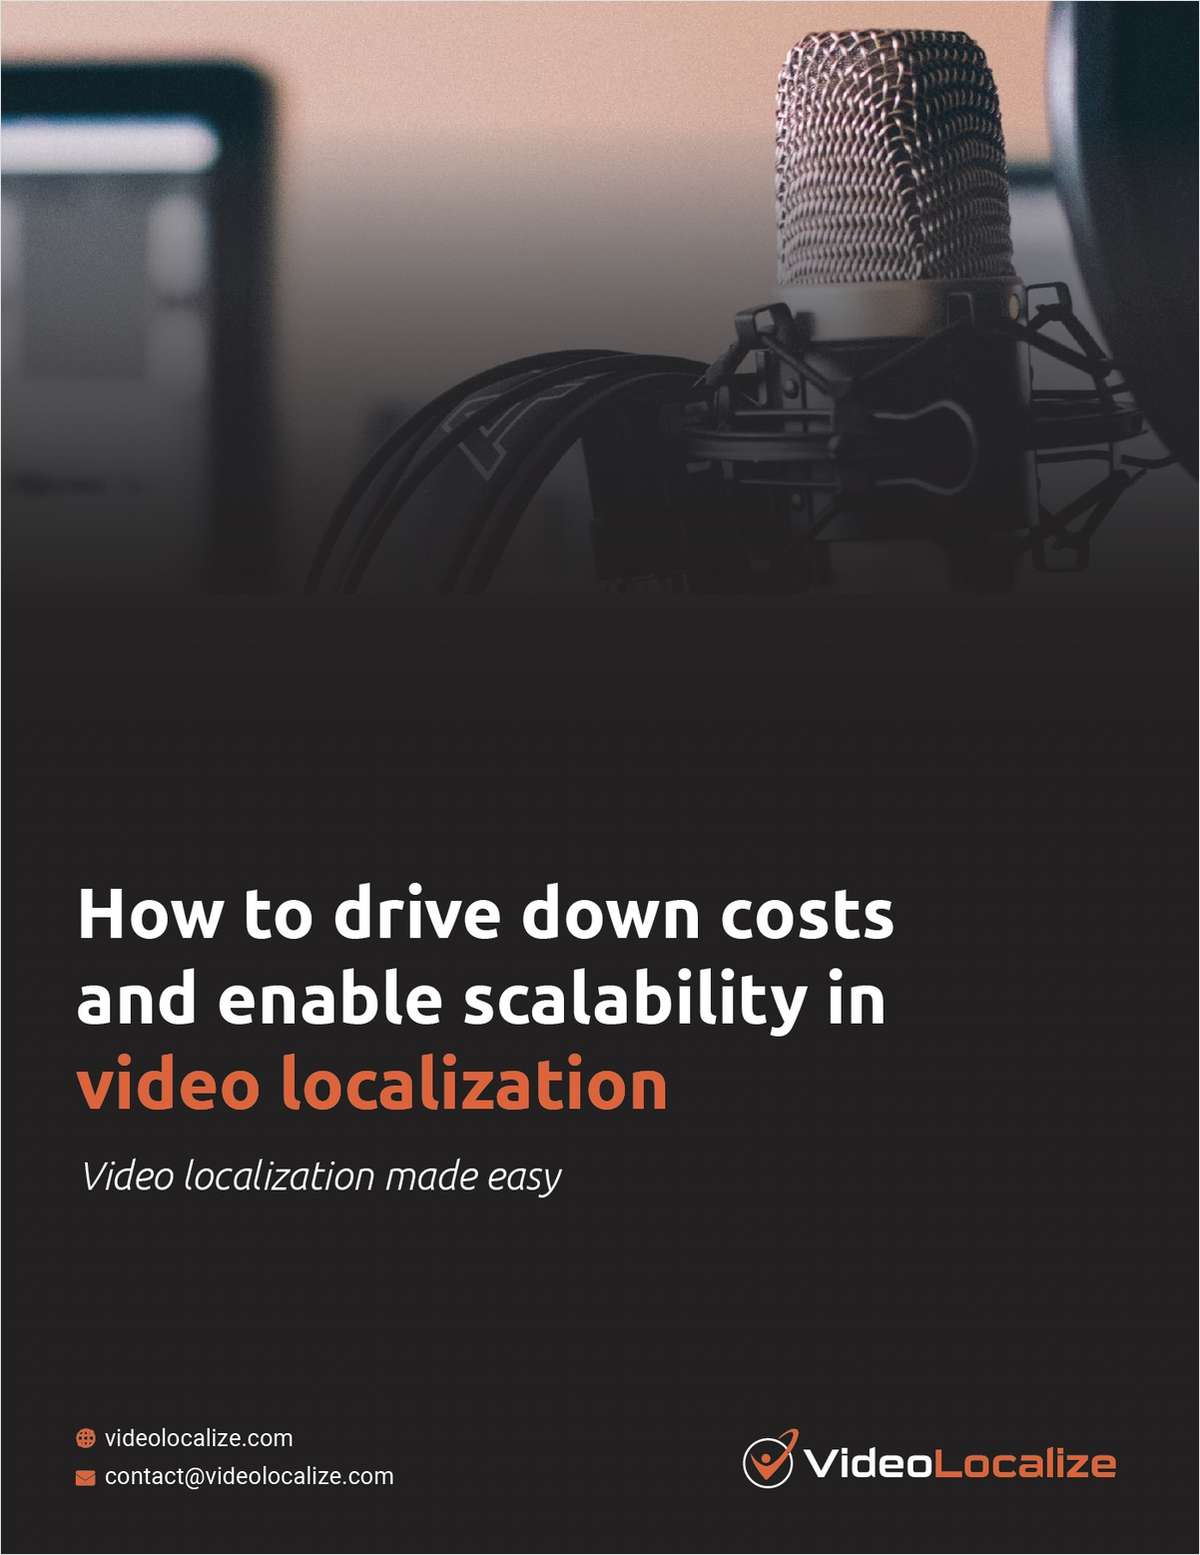 How to drive down costs and enable scalability in video localization